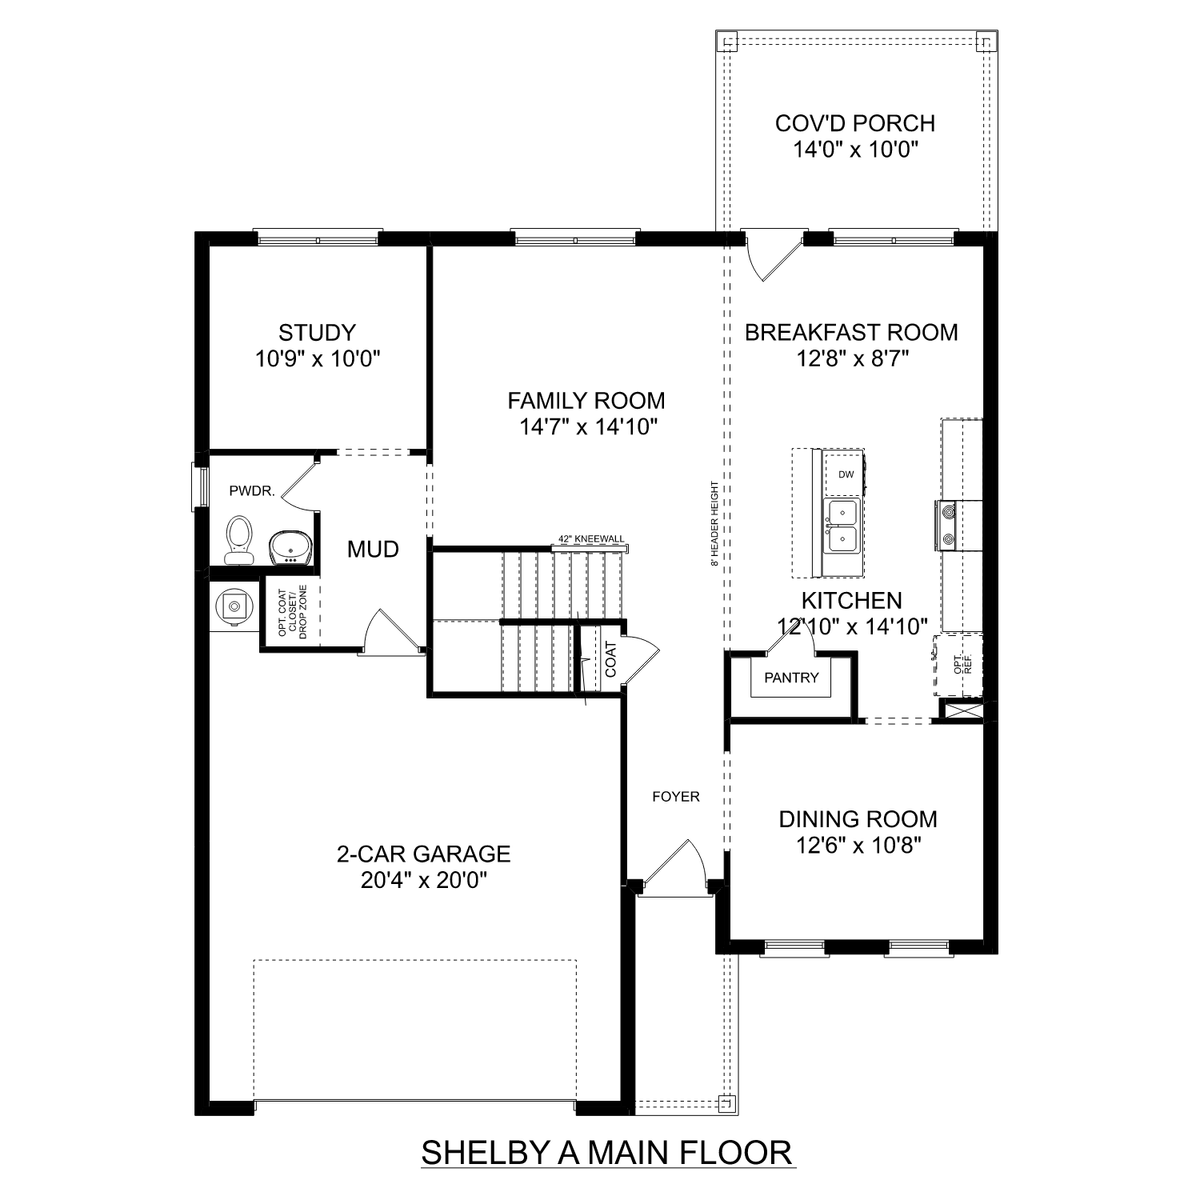 1 - The Shelby A buildable floor plan layout in Davidson Homes' Mallard Landing community.